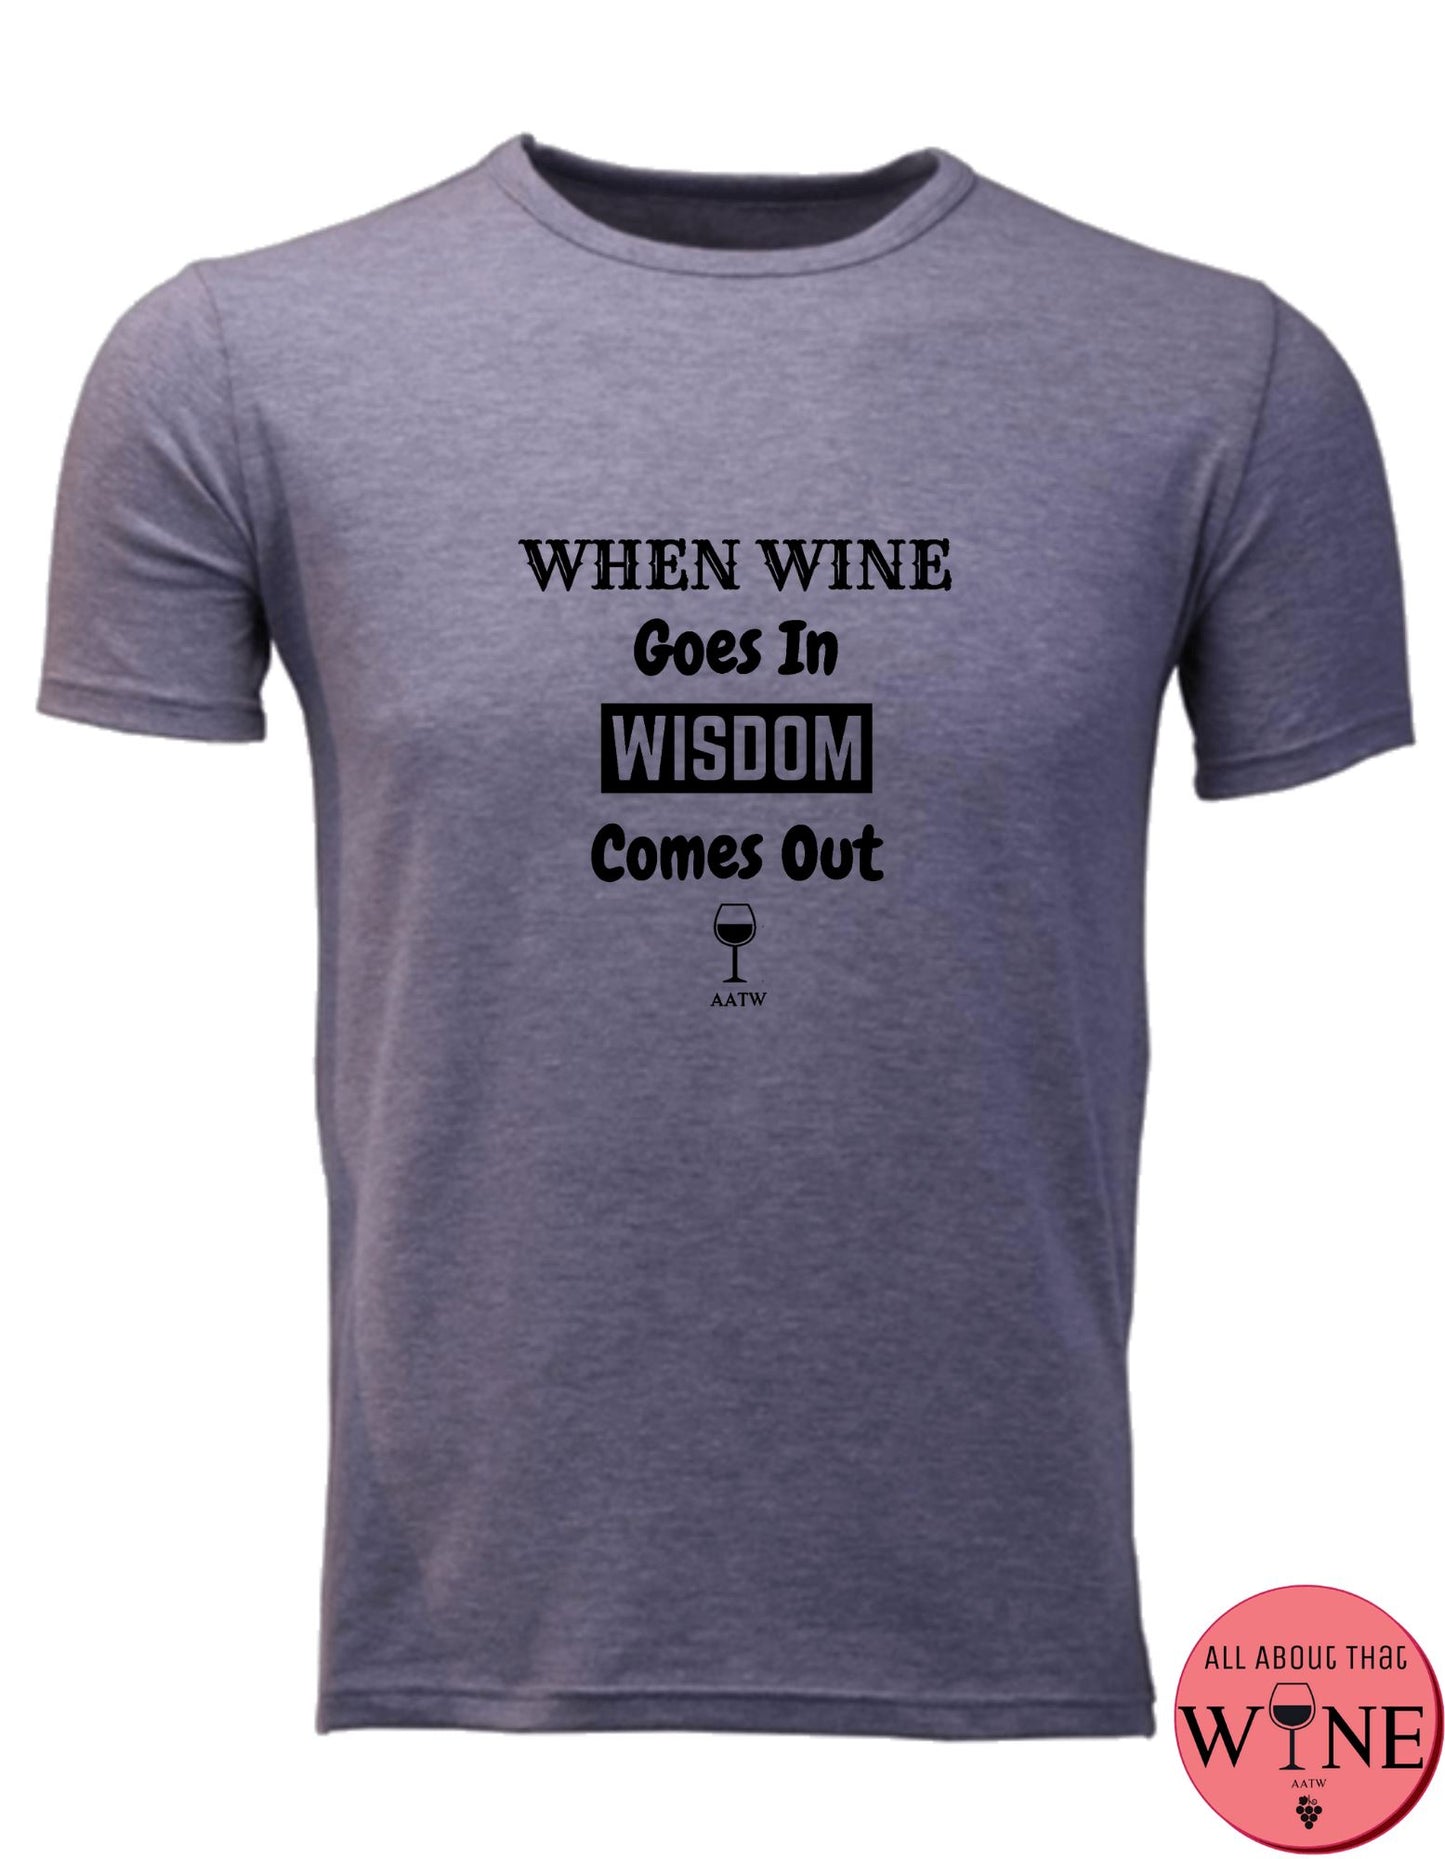 When Wine Goes In - Unisex/Male S Grey melange with black